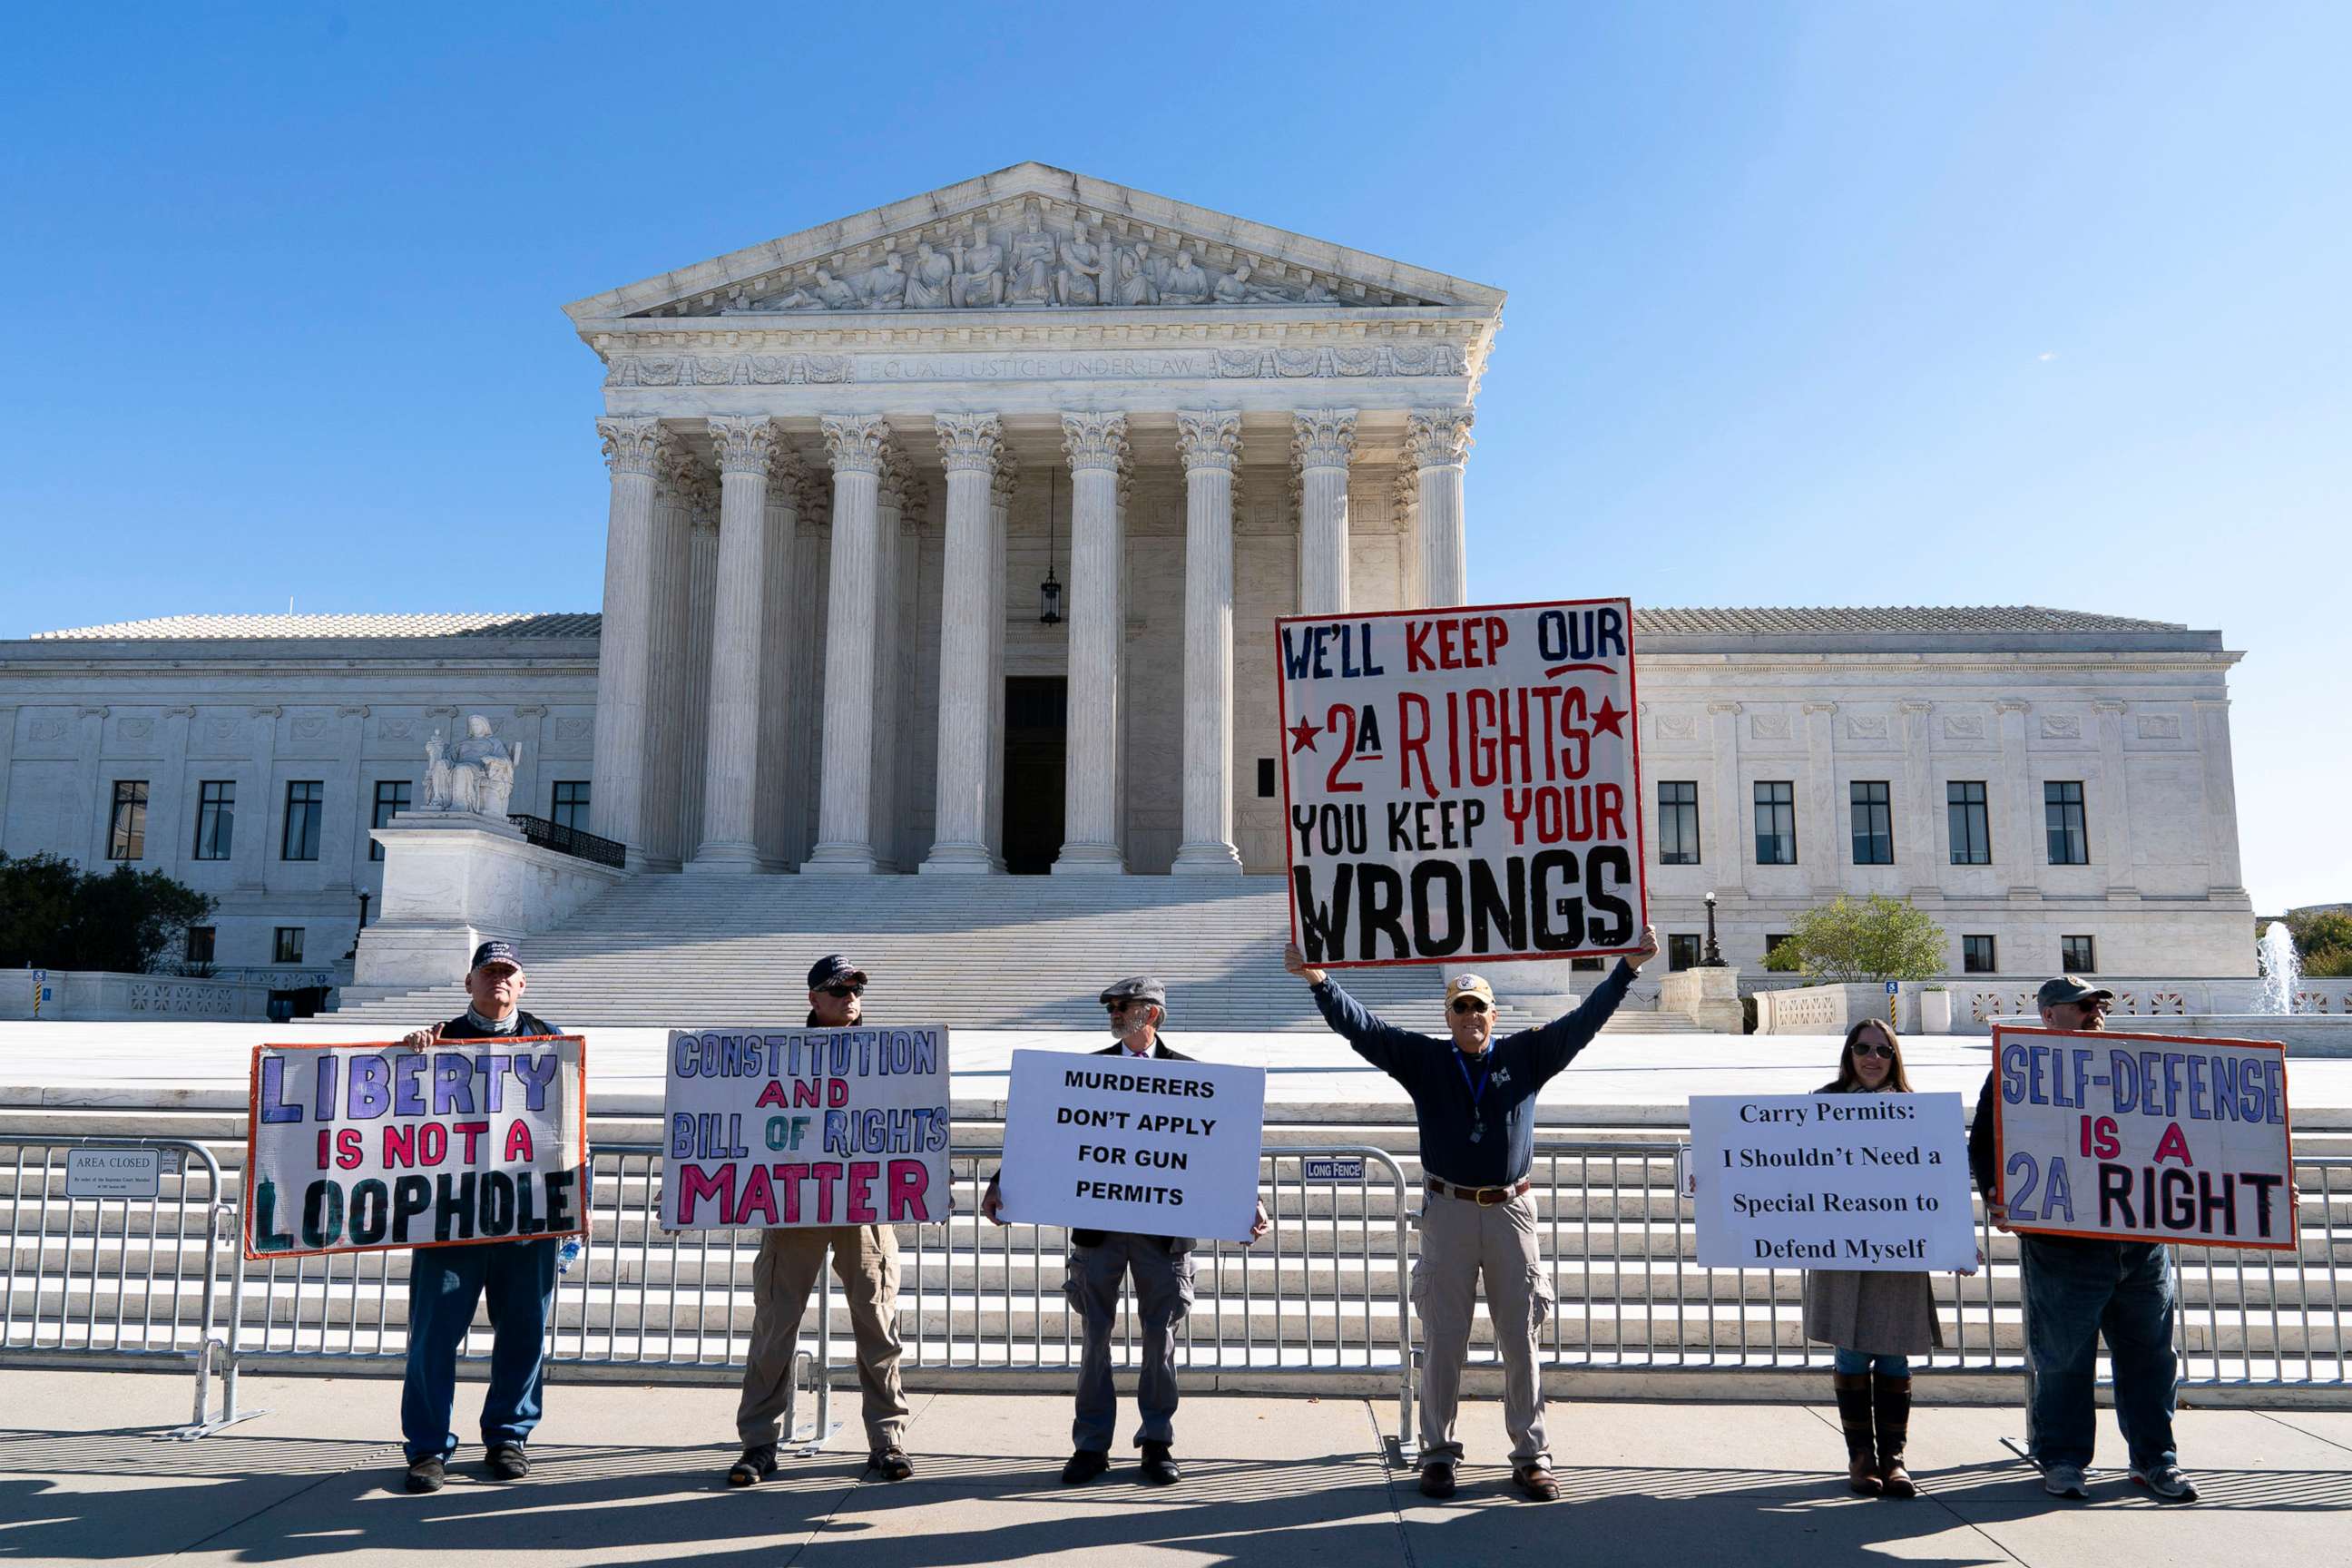 PHOTO: In this Nov. 3, 2021, file photo, demonstrators rally outside the U.S. Supreme Court in Washington, D.C.